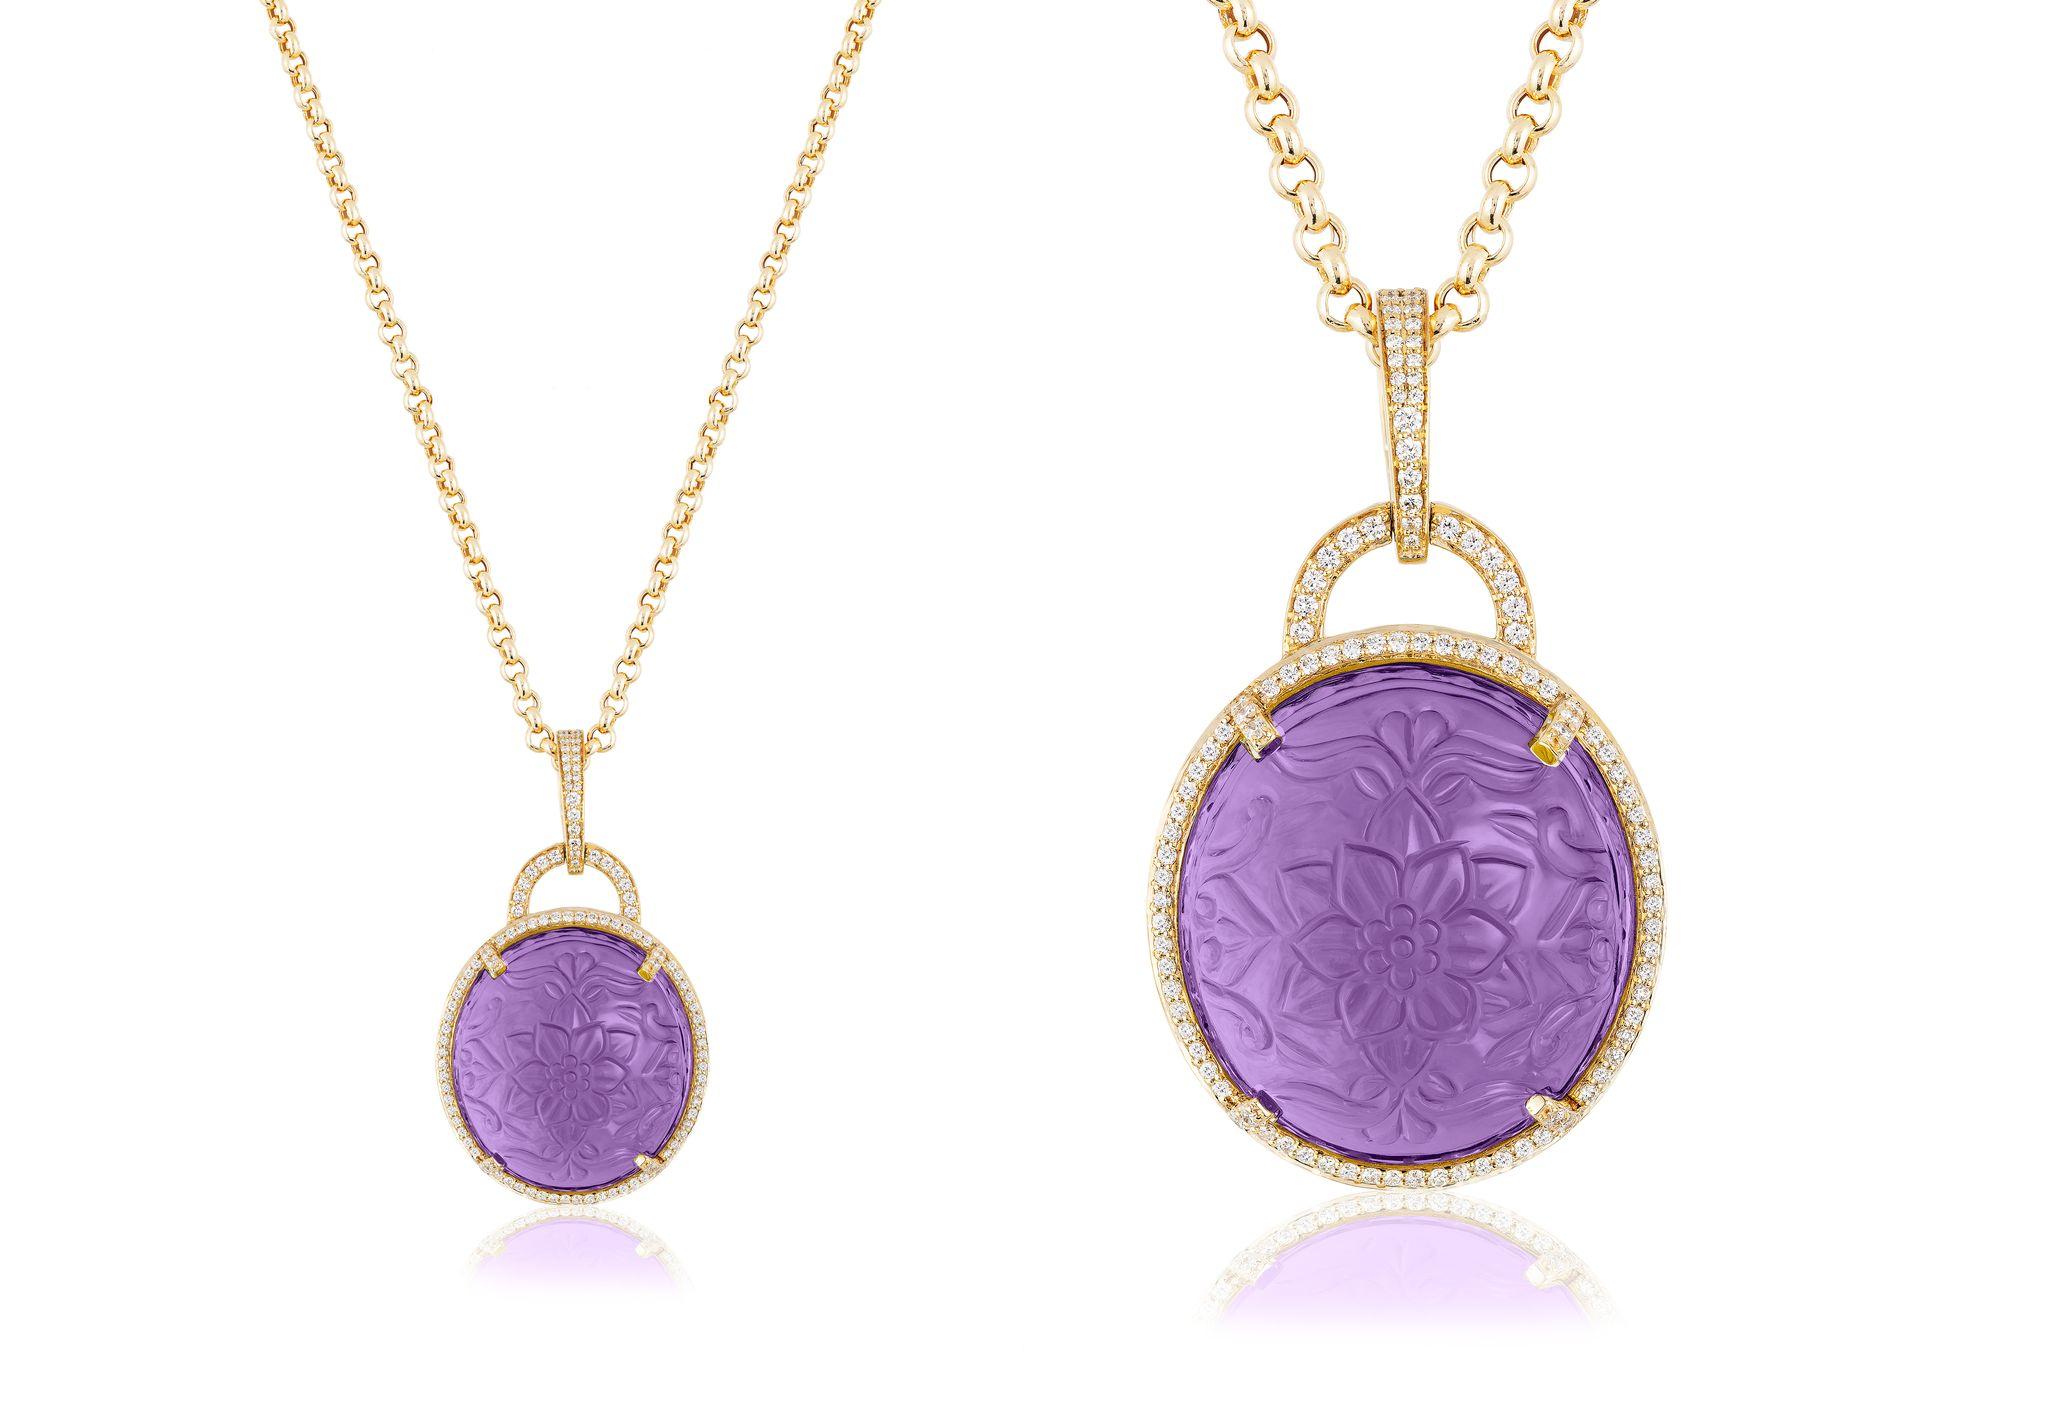 Oval Amethyst Carved Pendant with Diamonds in 18K Yellow Gold, from 'Rock 'N Roll' Collection
Length: 18